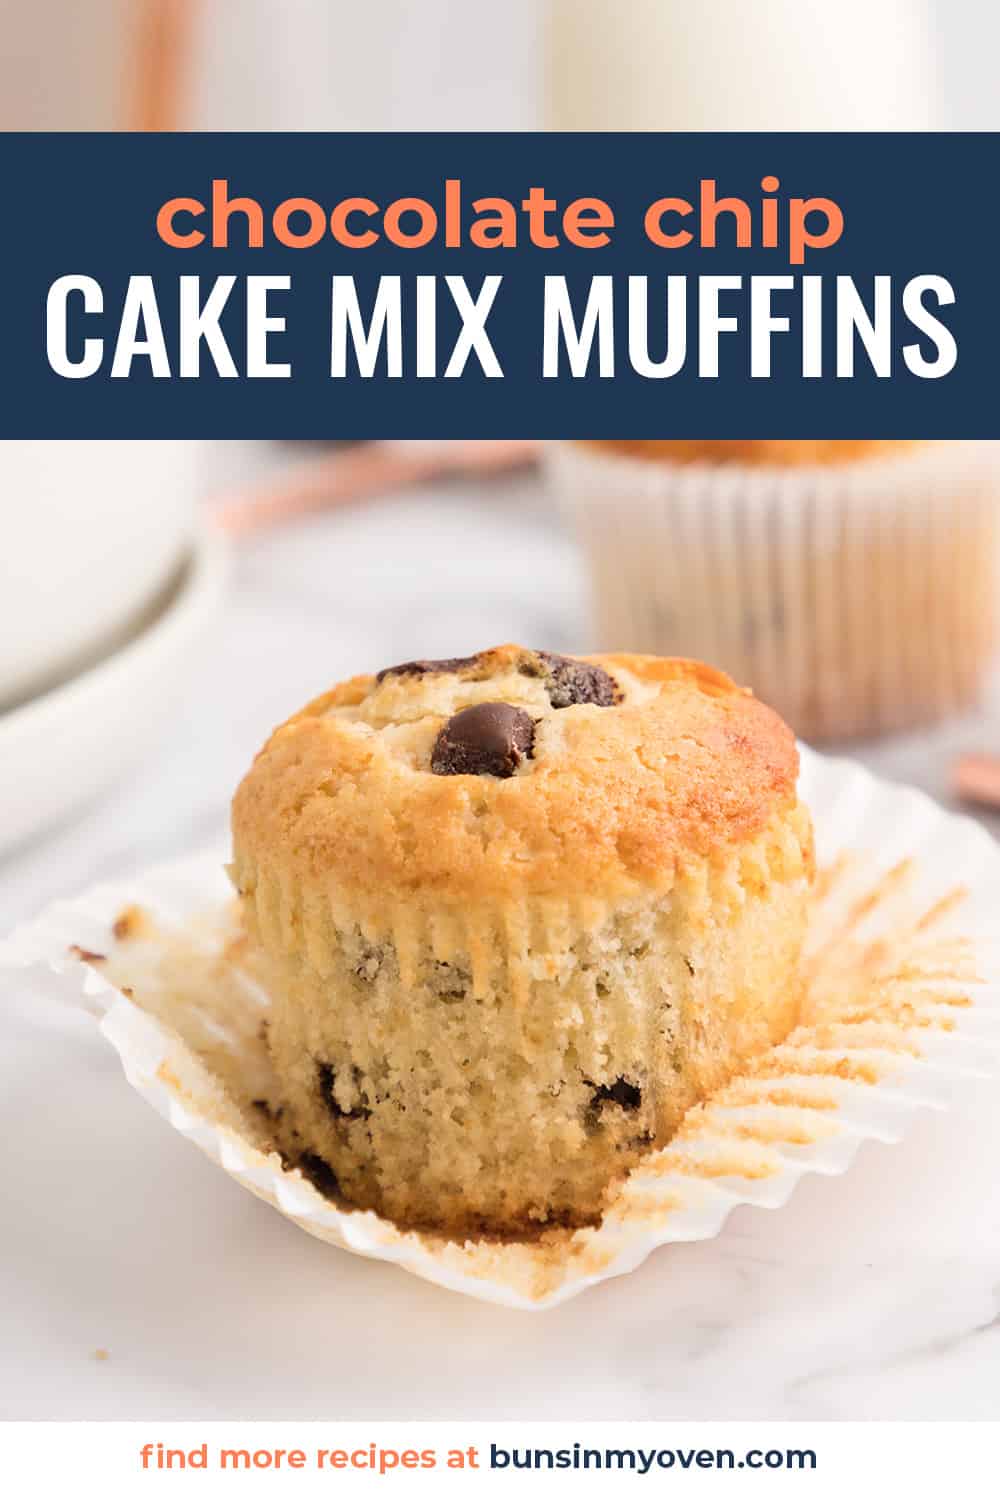 Chocolate chip muffin on liner.